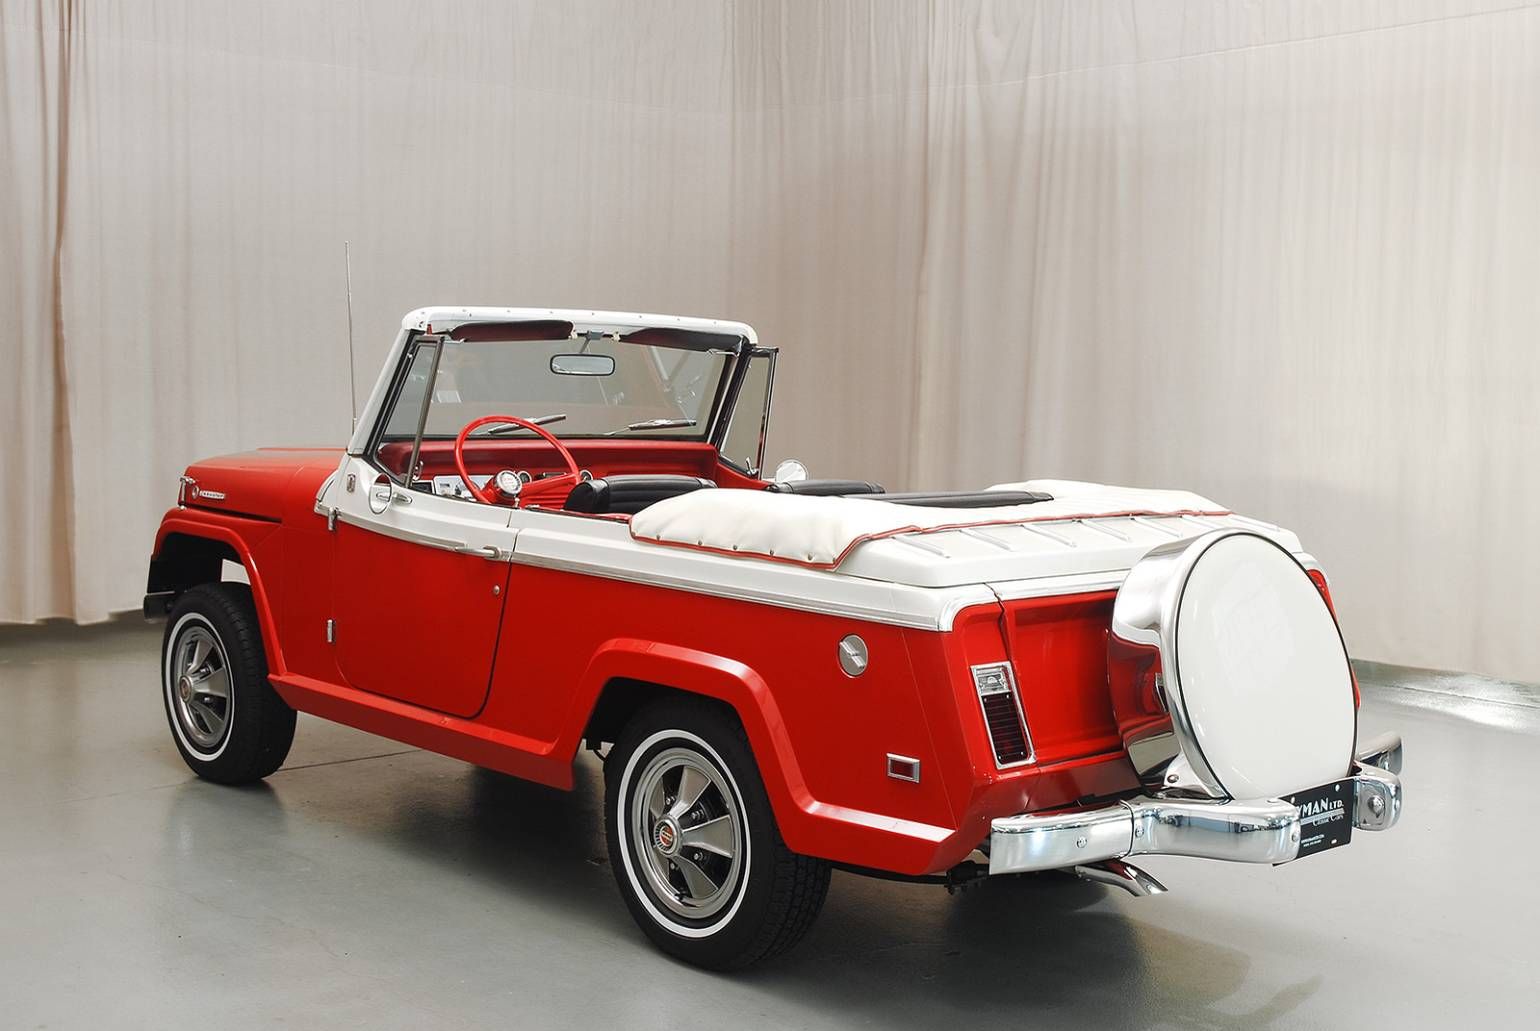 1968 Jeepster Convertible